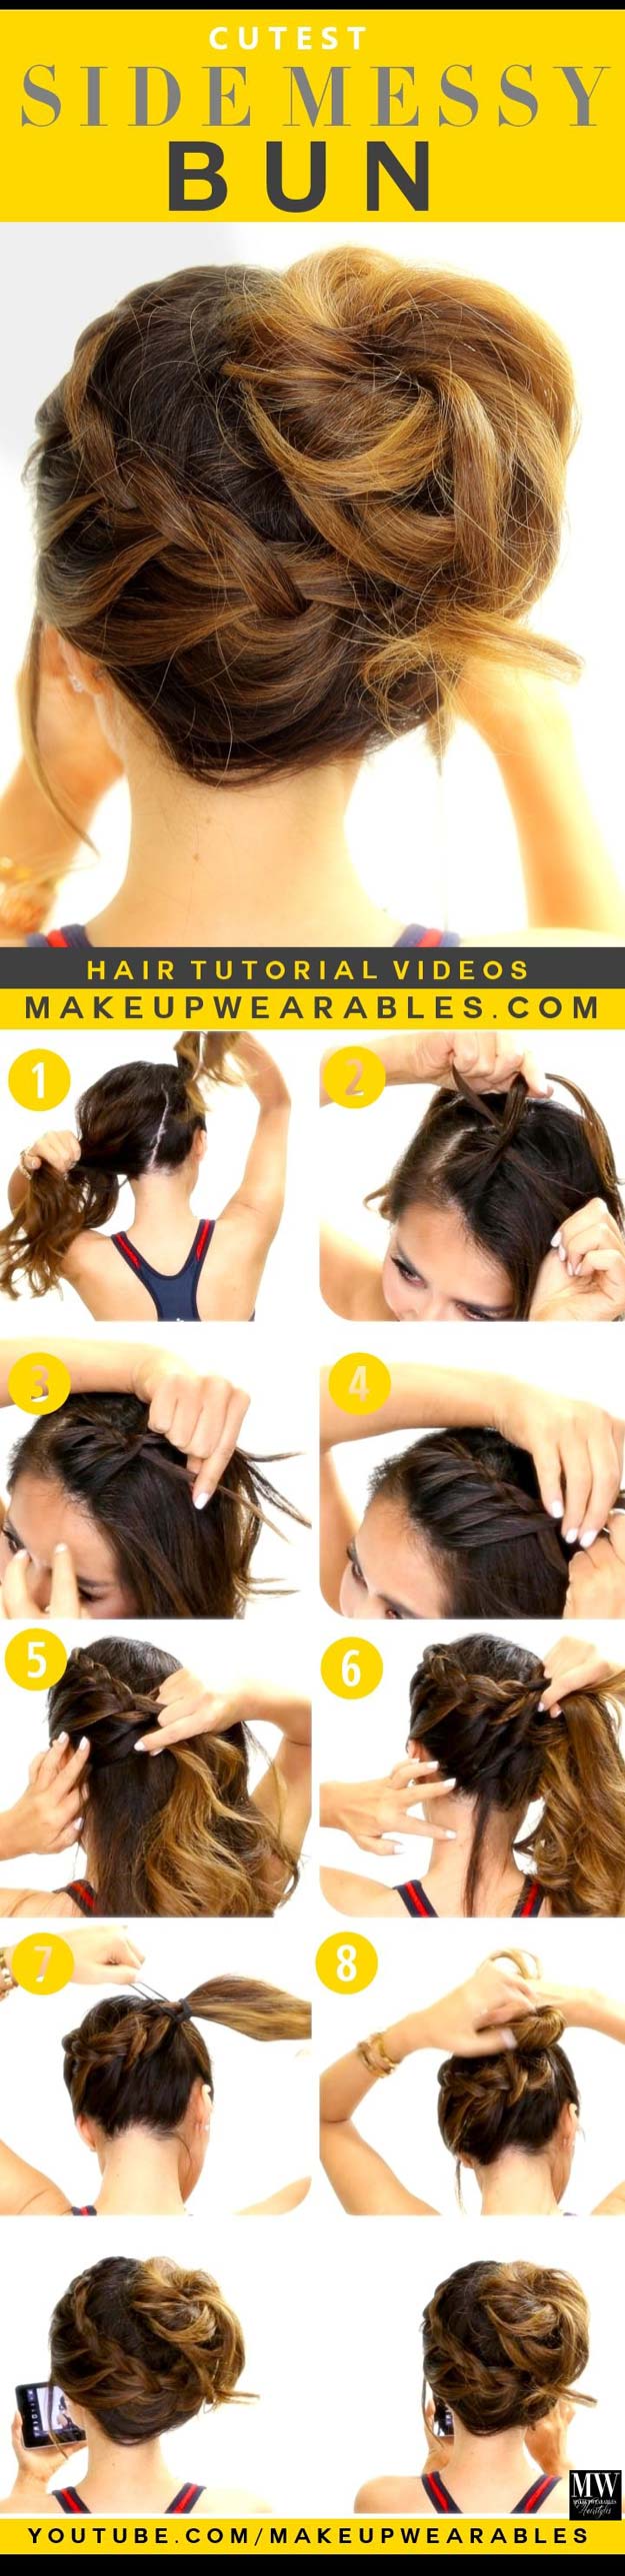 Best Hair Braiding Tutorials - Siden Messy Bun - Easy Step by Step Tutorials for Braids - How To Braid Fishtail, French Braids, Flower Crown, Side Braids, Cornrows, Updos - Cool Braided Hairstyles for Girls, Teens and Women - School, Day and Evening, Boho, Casual and Formal Looks #hairstyles #braiding #braidingtutorials #diyhair 